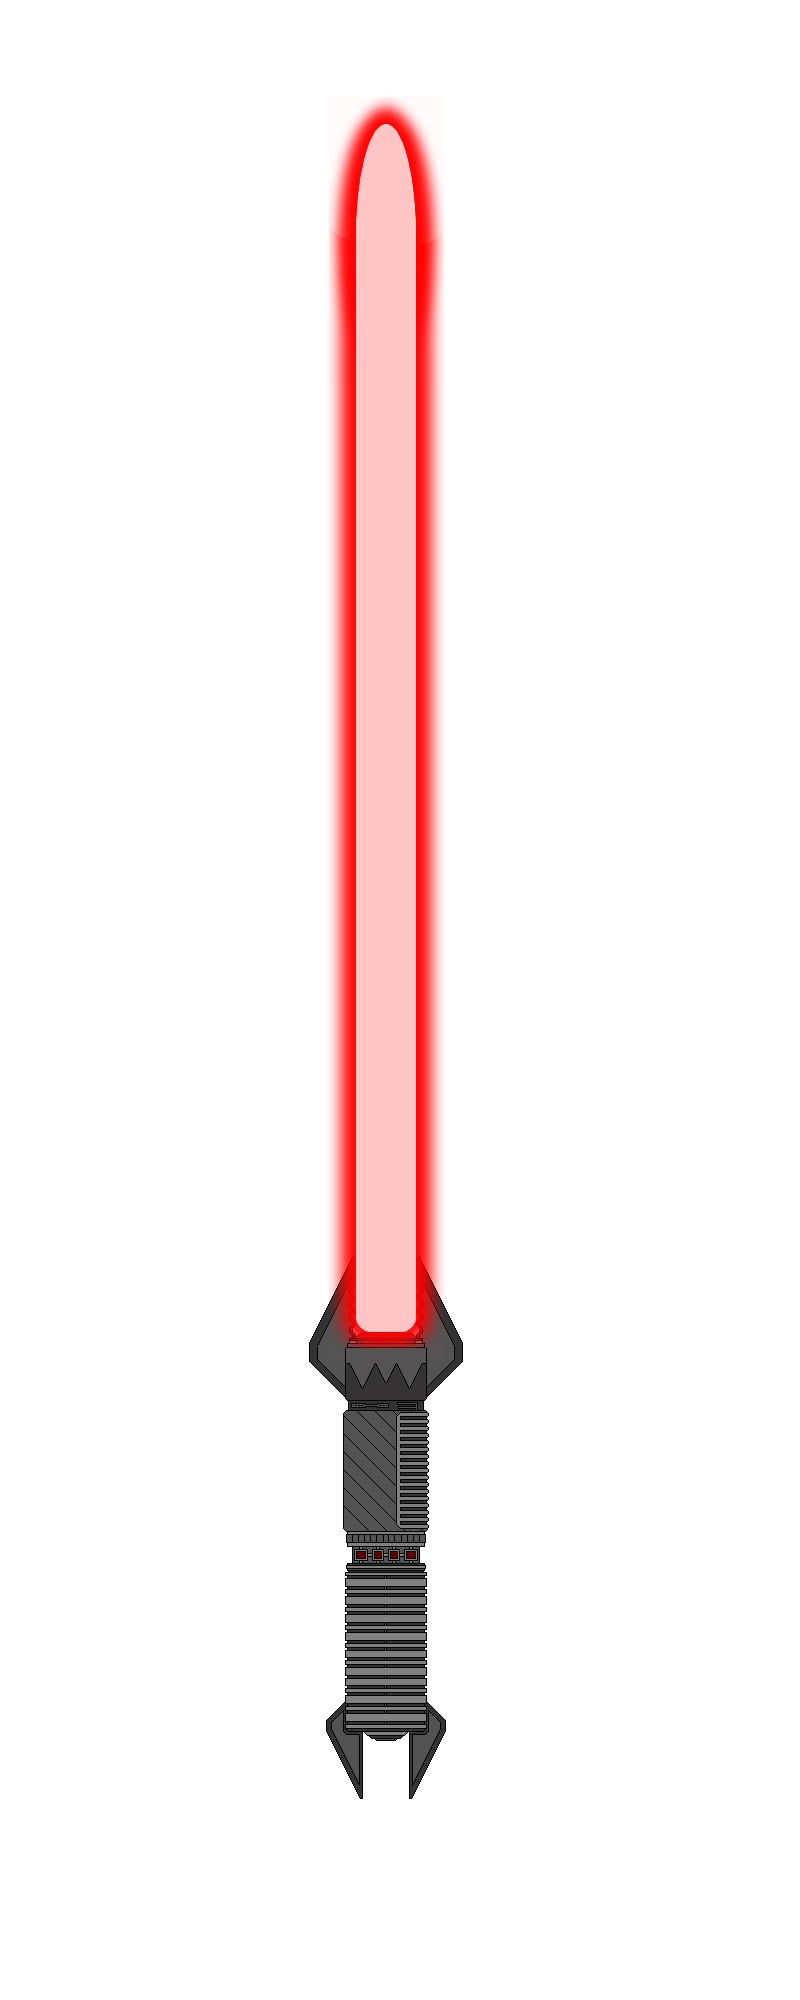 lightsaber clipart proposed green